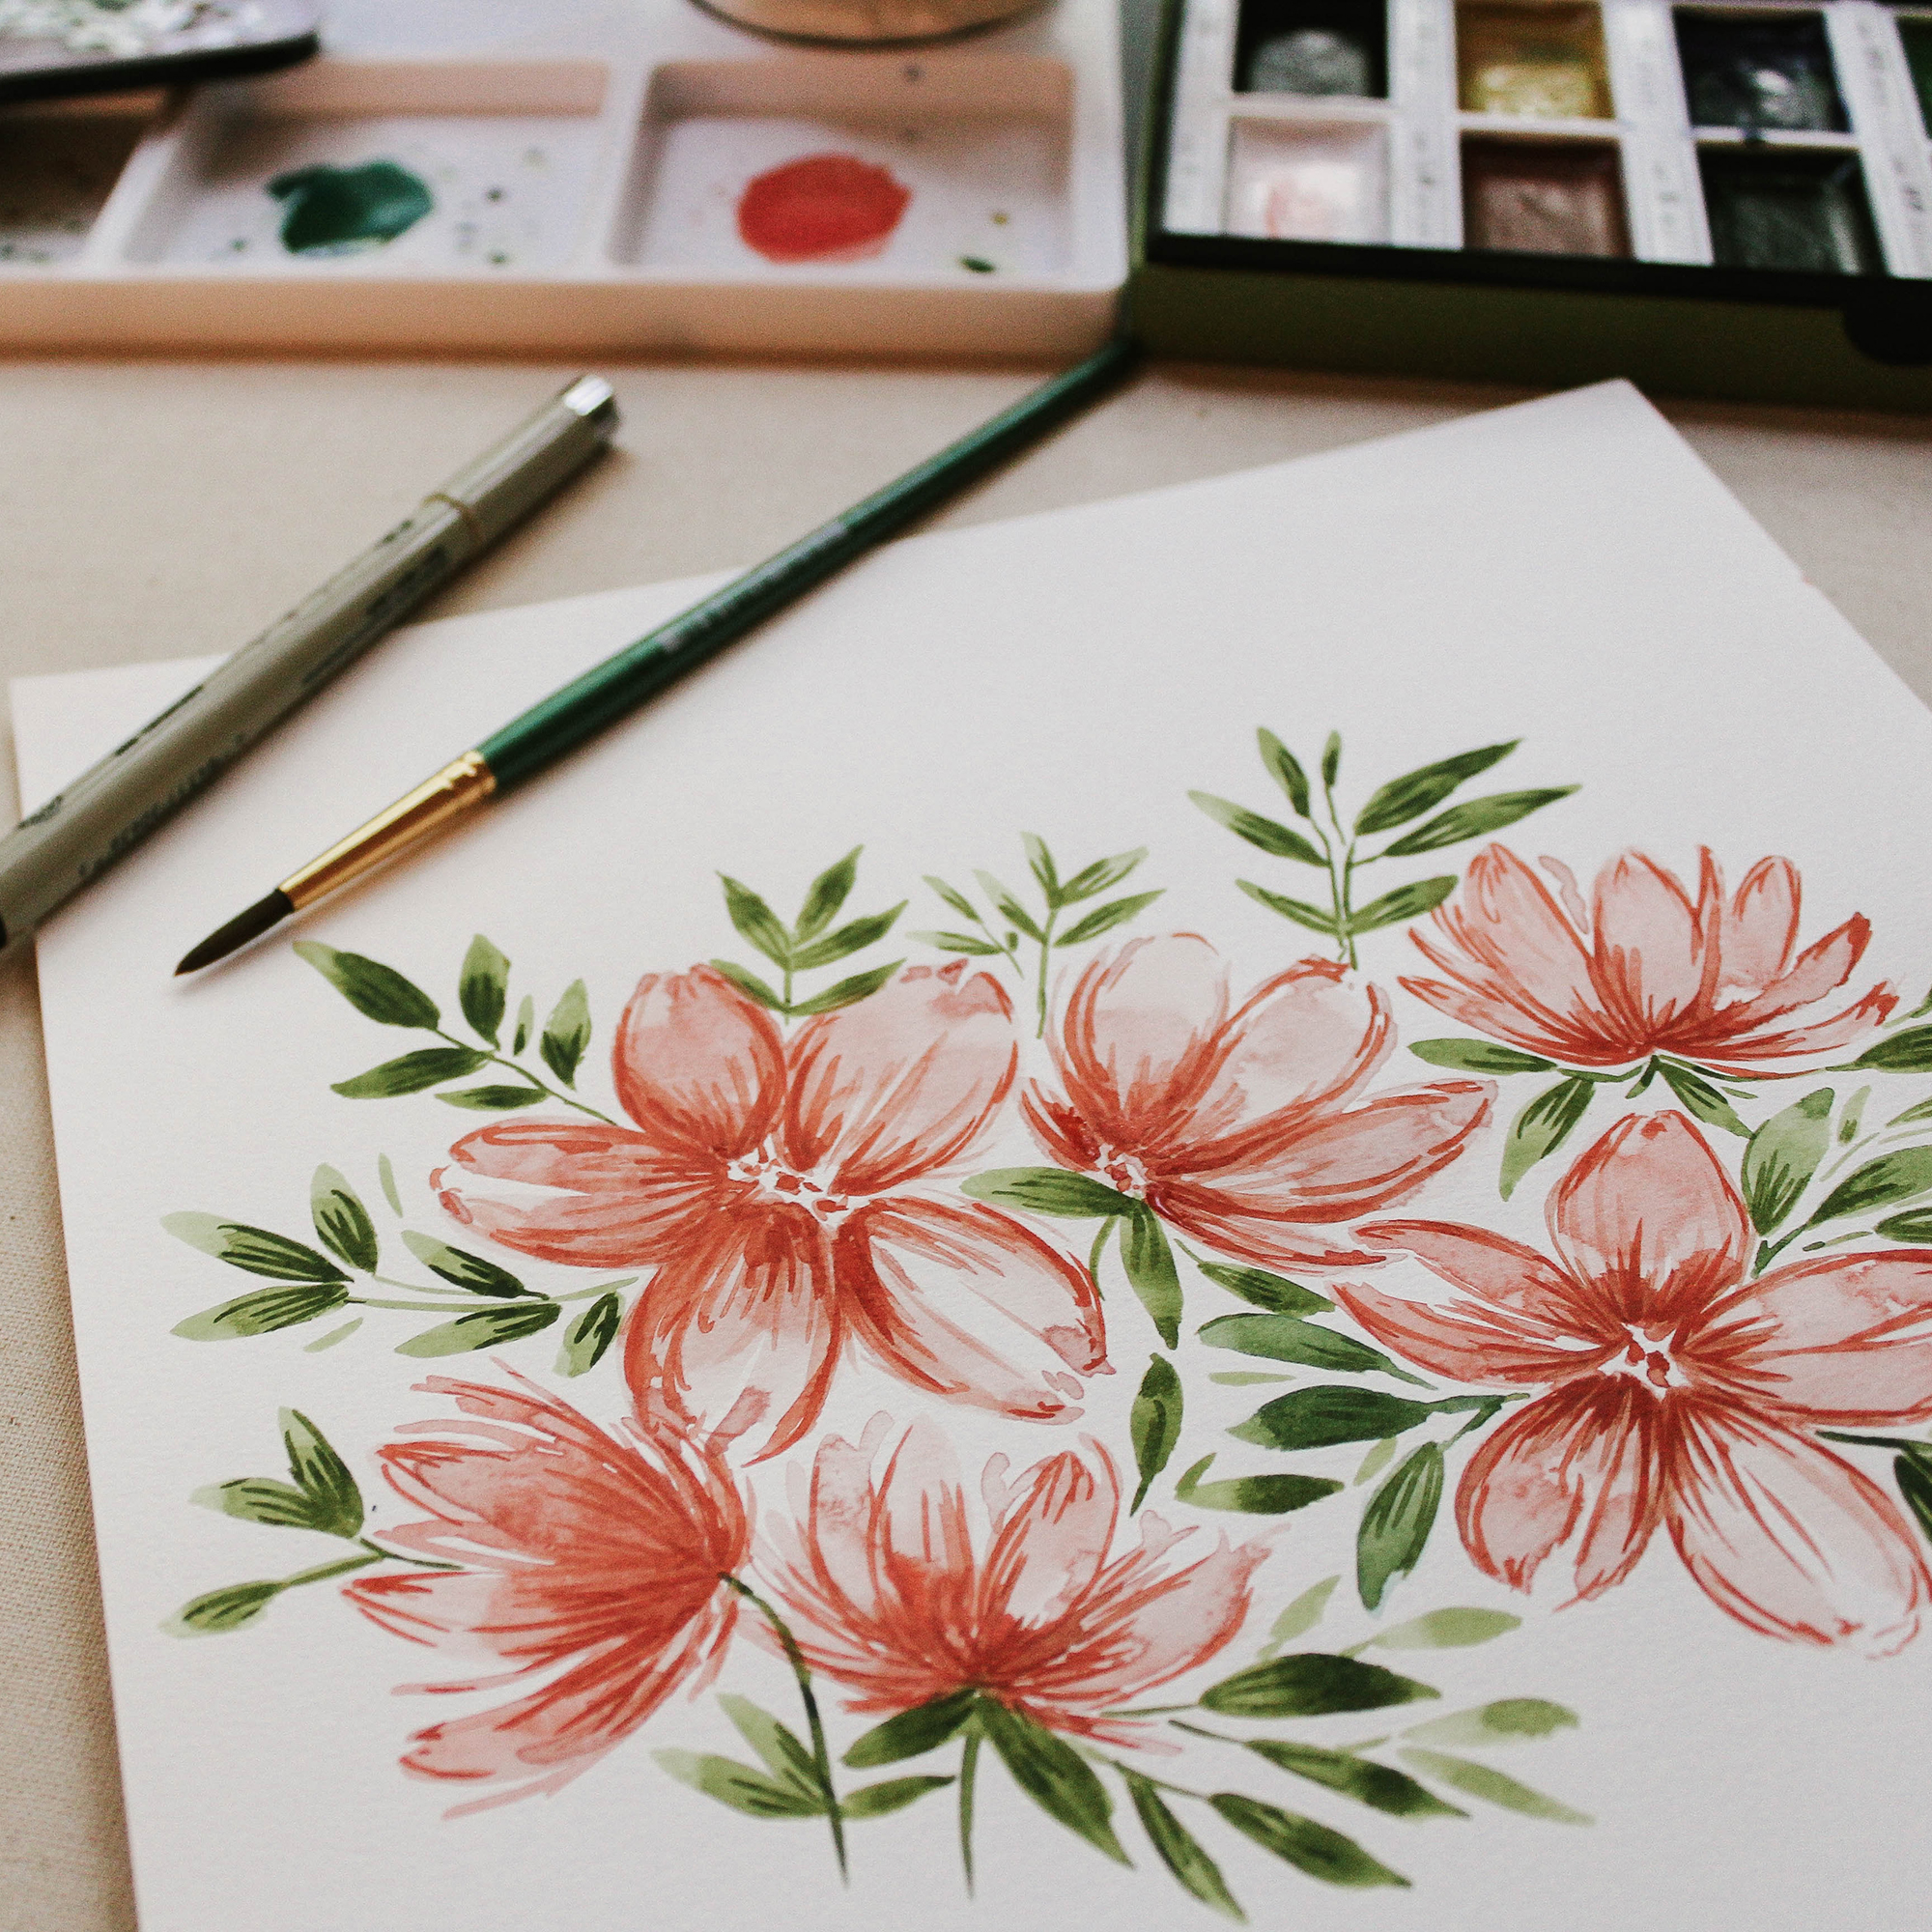 Sketched flowers